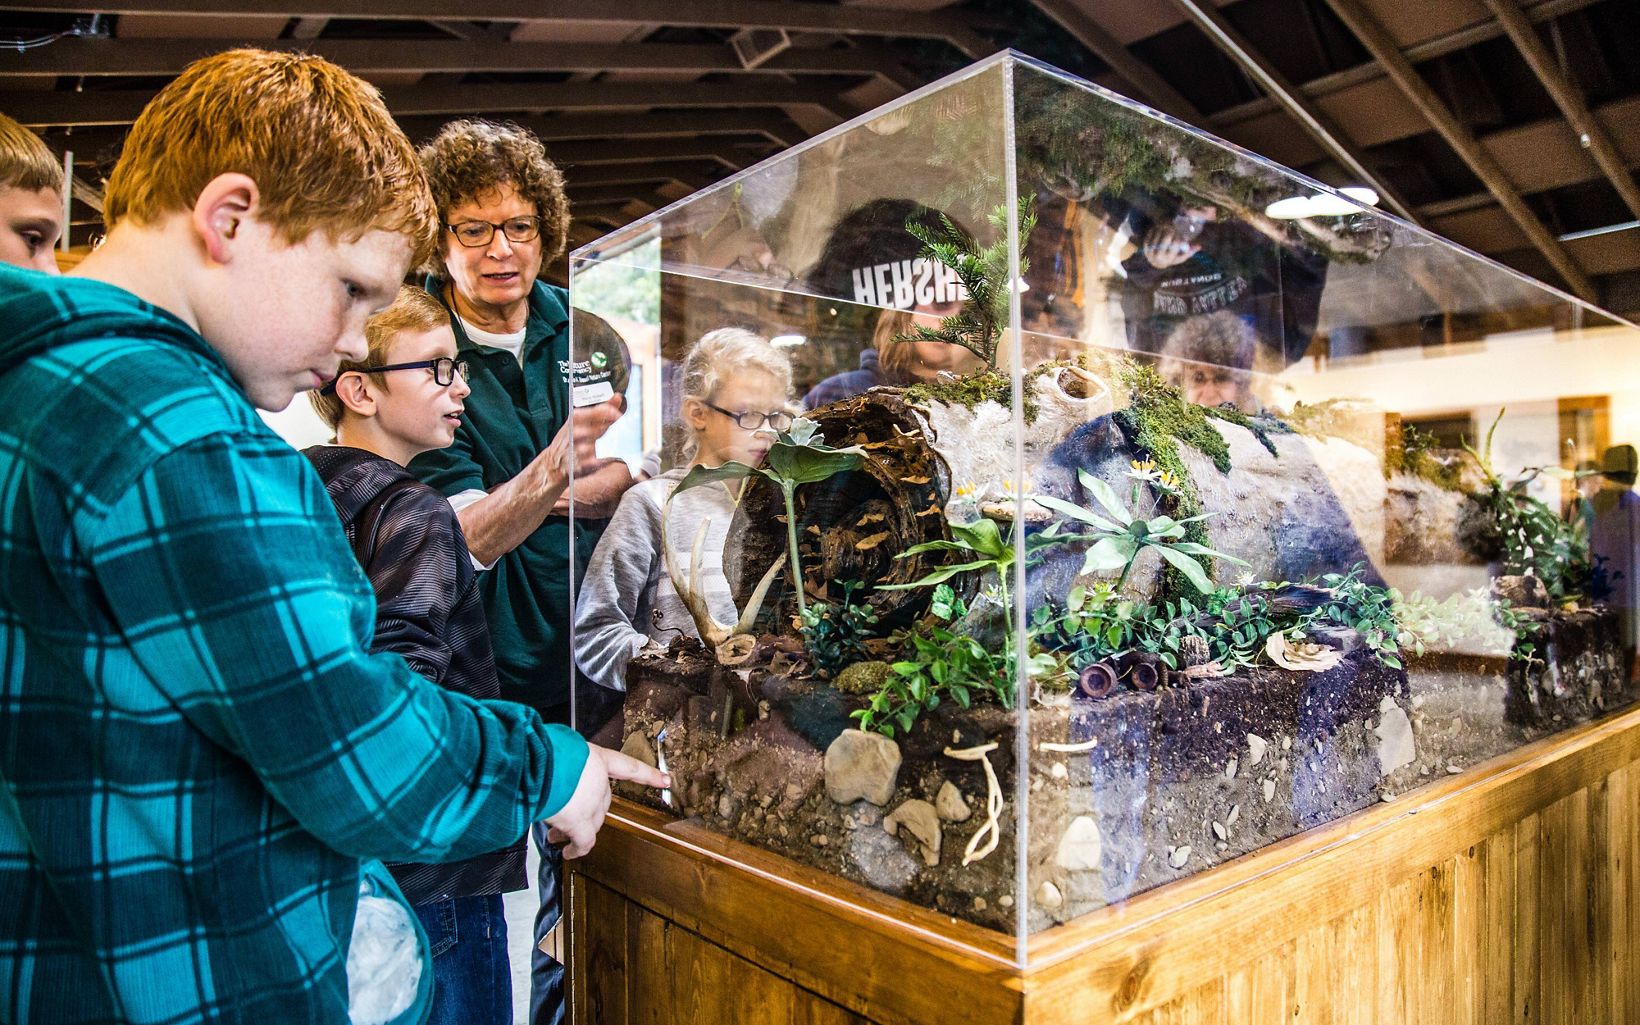 James K. Bissell Nature Center There are many educational displays to explore and ways to learn about nature in Ohio. © David Ike